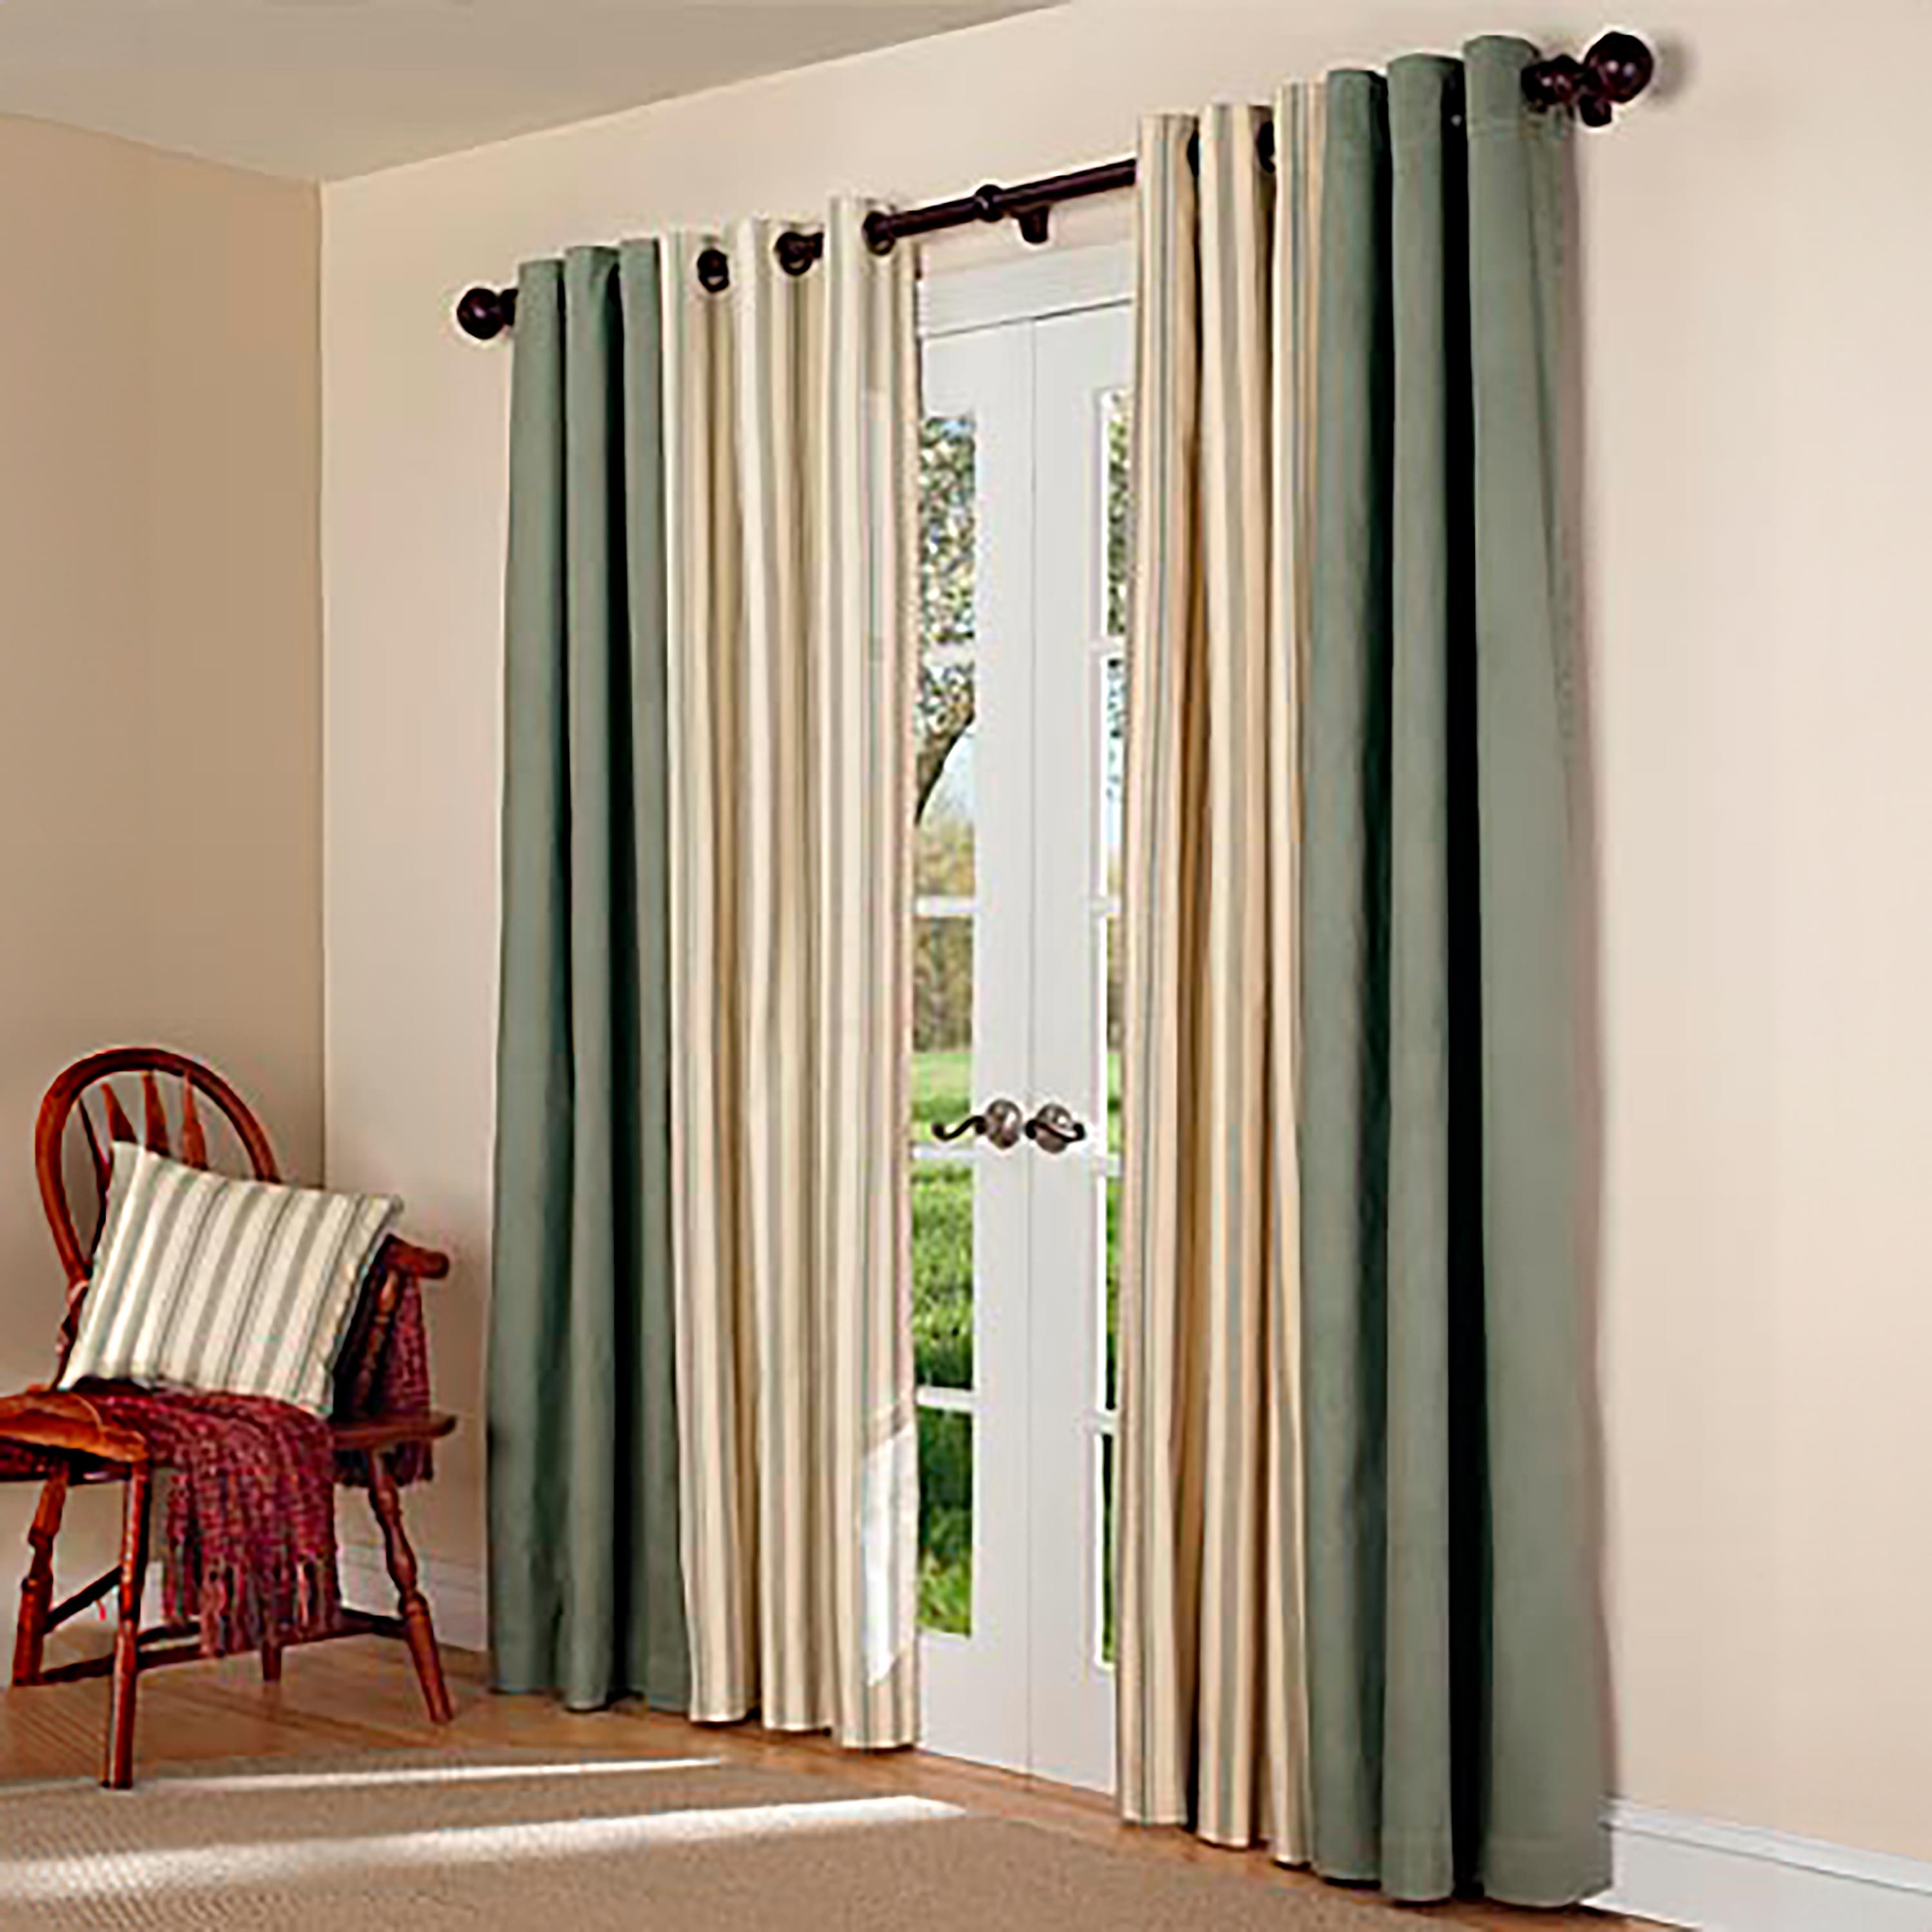 Image of 40"W x 15" L Thermalogic Insulated Grommet-Top Valance, in Sage